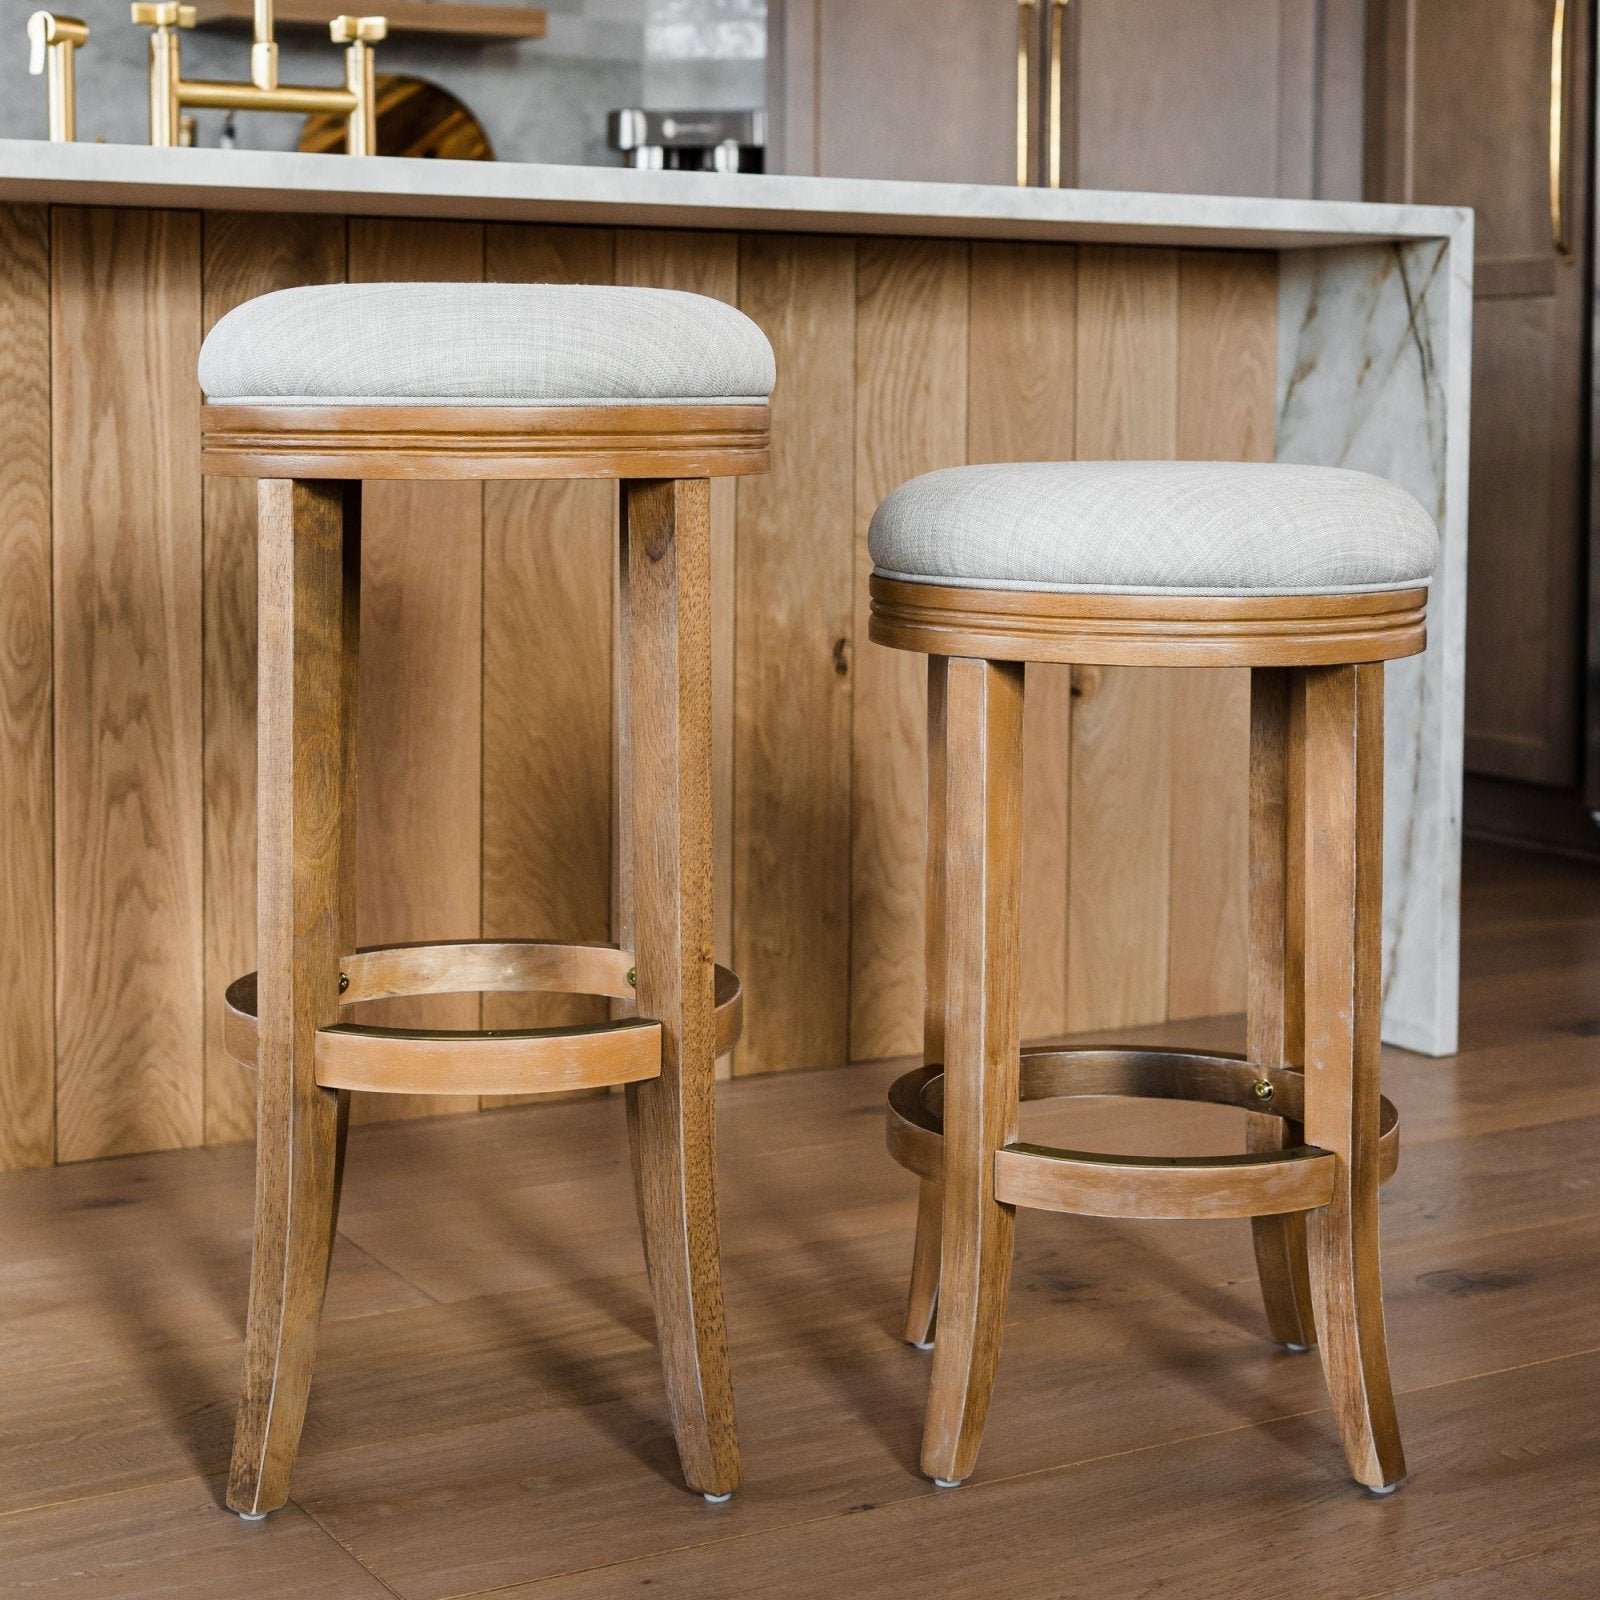 Eva Counter Stool in Weathered Oak Finish with Sand Color Fabric Upholstery in Stools by Maven Lane